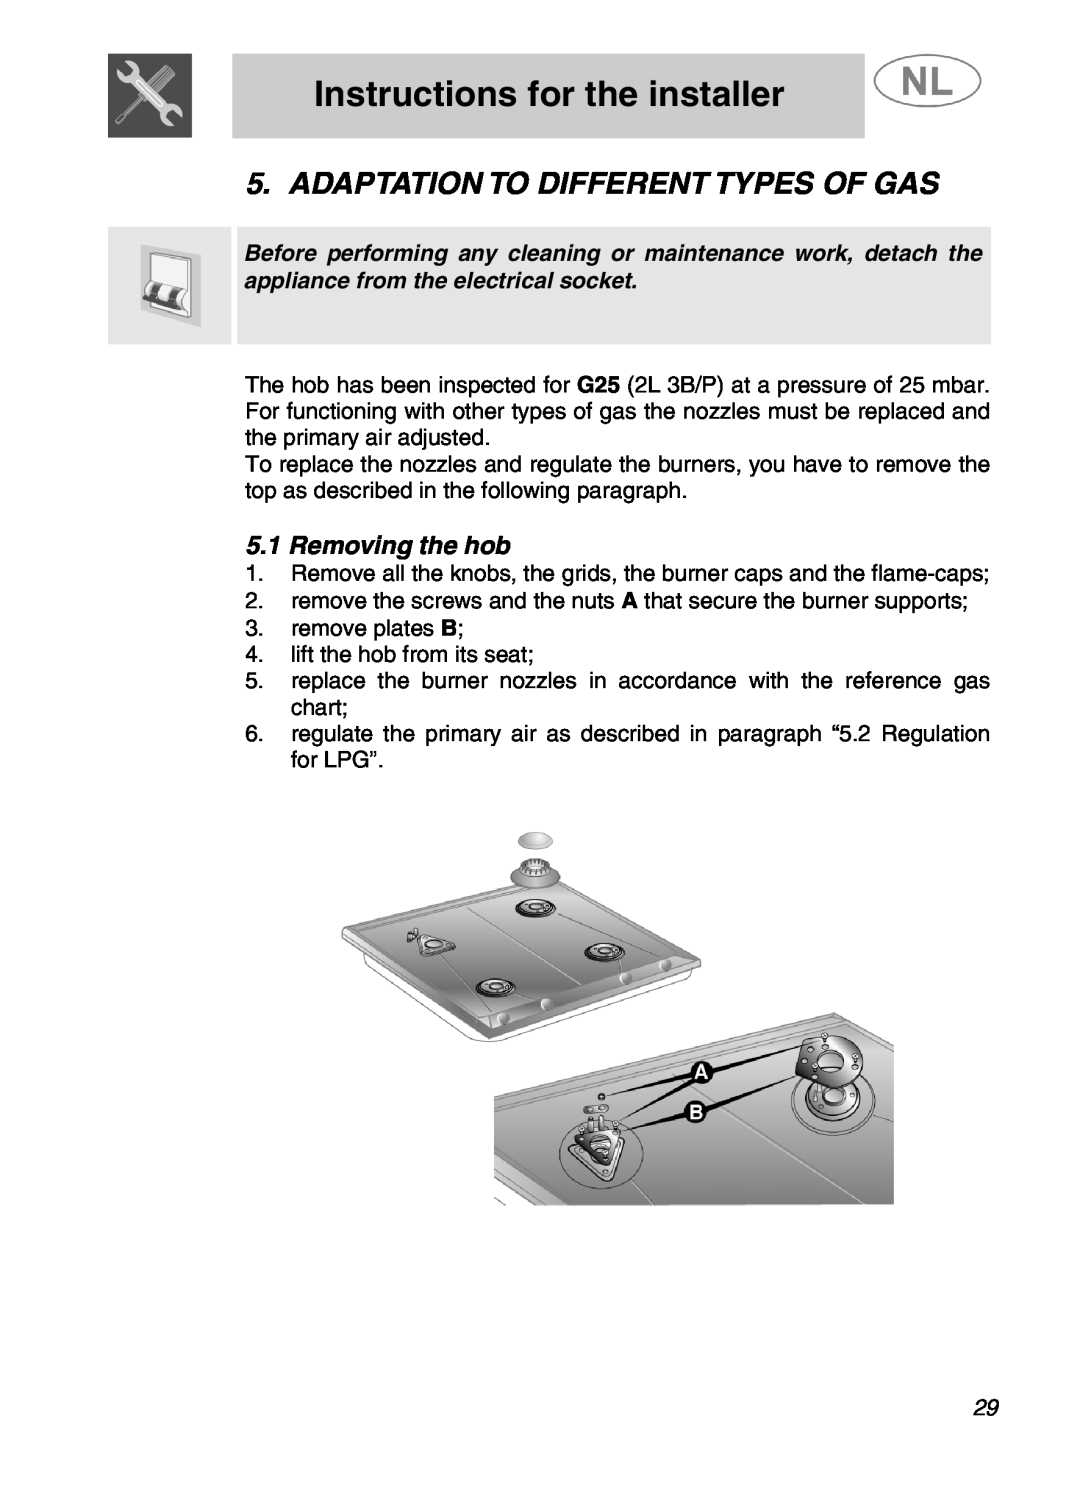 Smeg SLRV596X1 manual Adaptation To Different Types Of Gas, Removing the hob, Instructions for the installer 